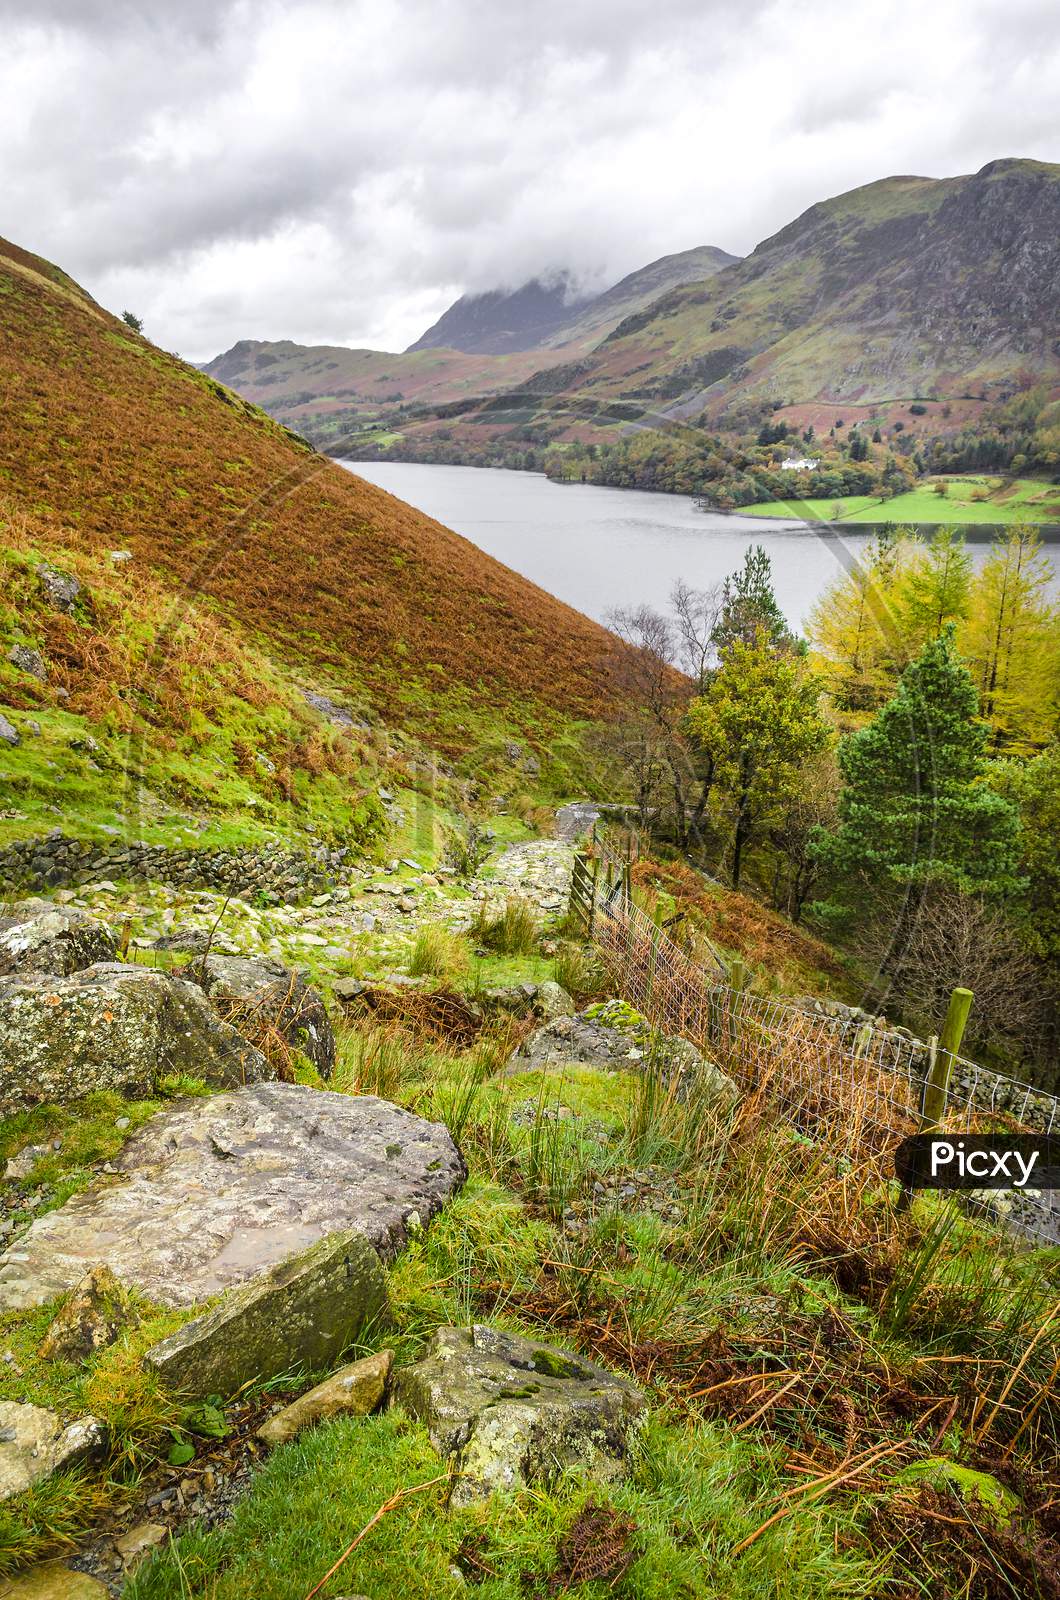 A view of Lake Buttermere from the path leading to haystacks